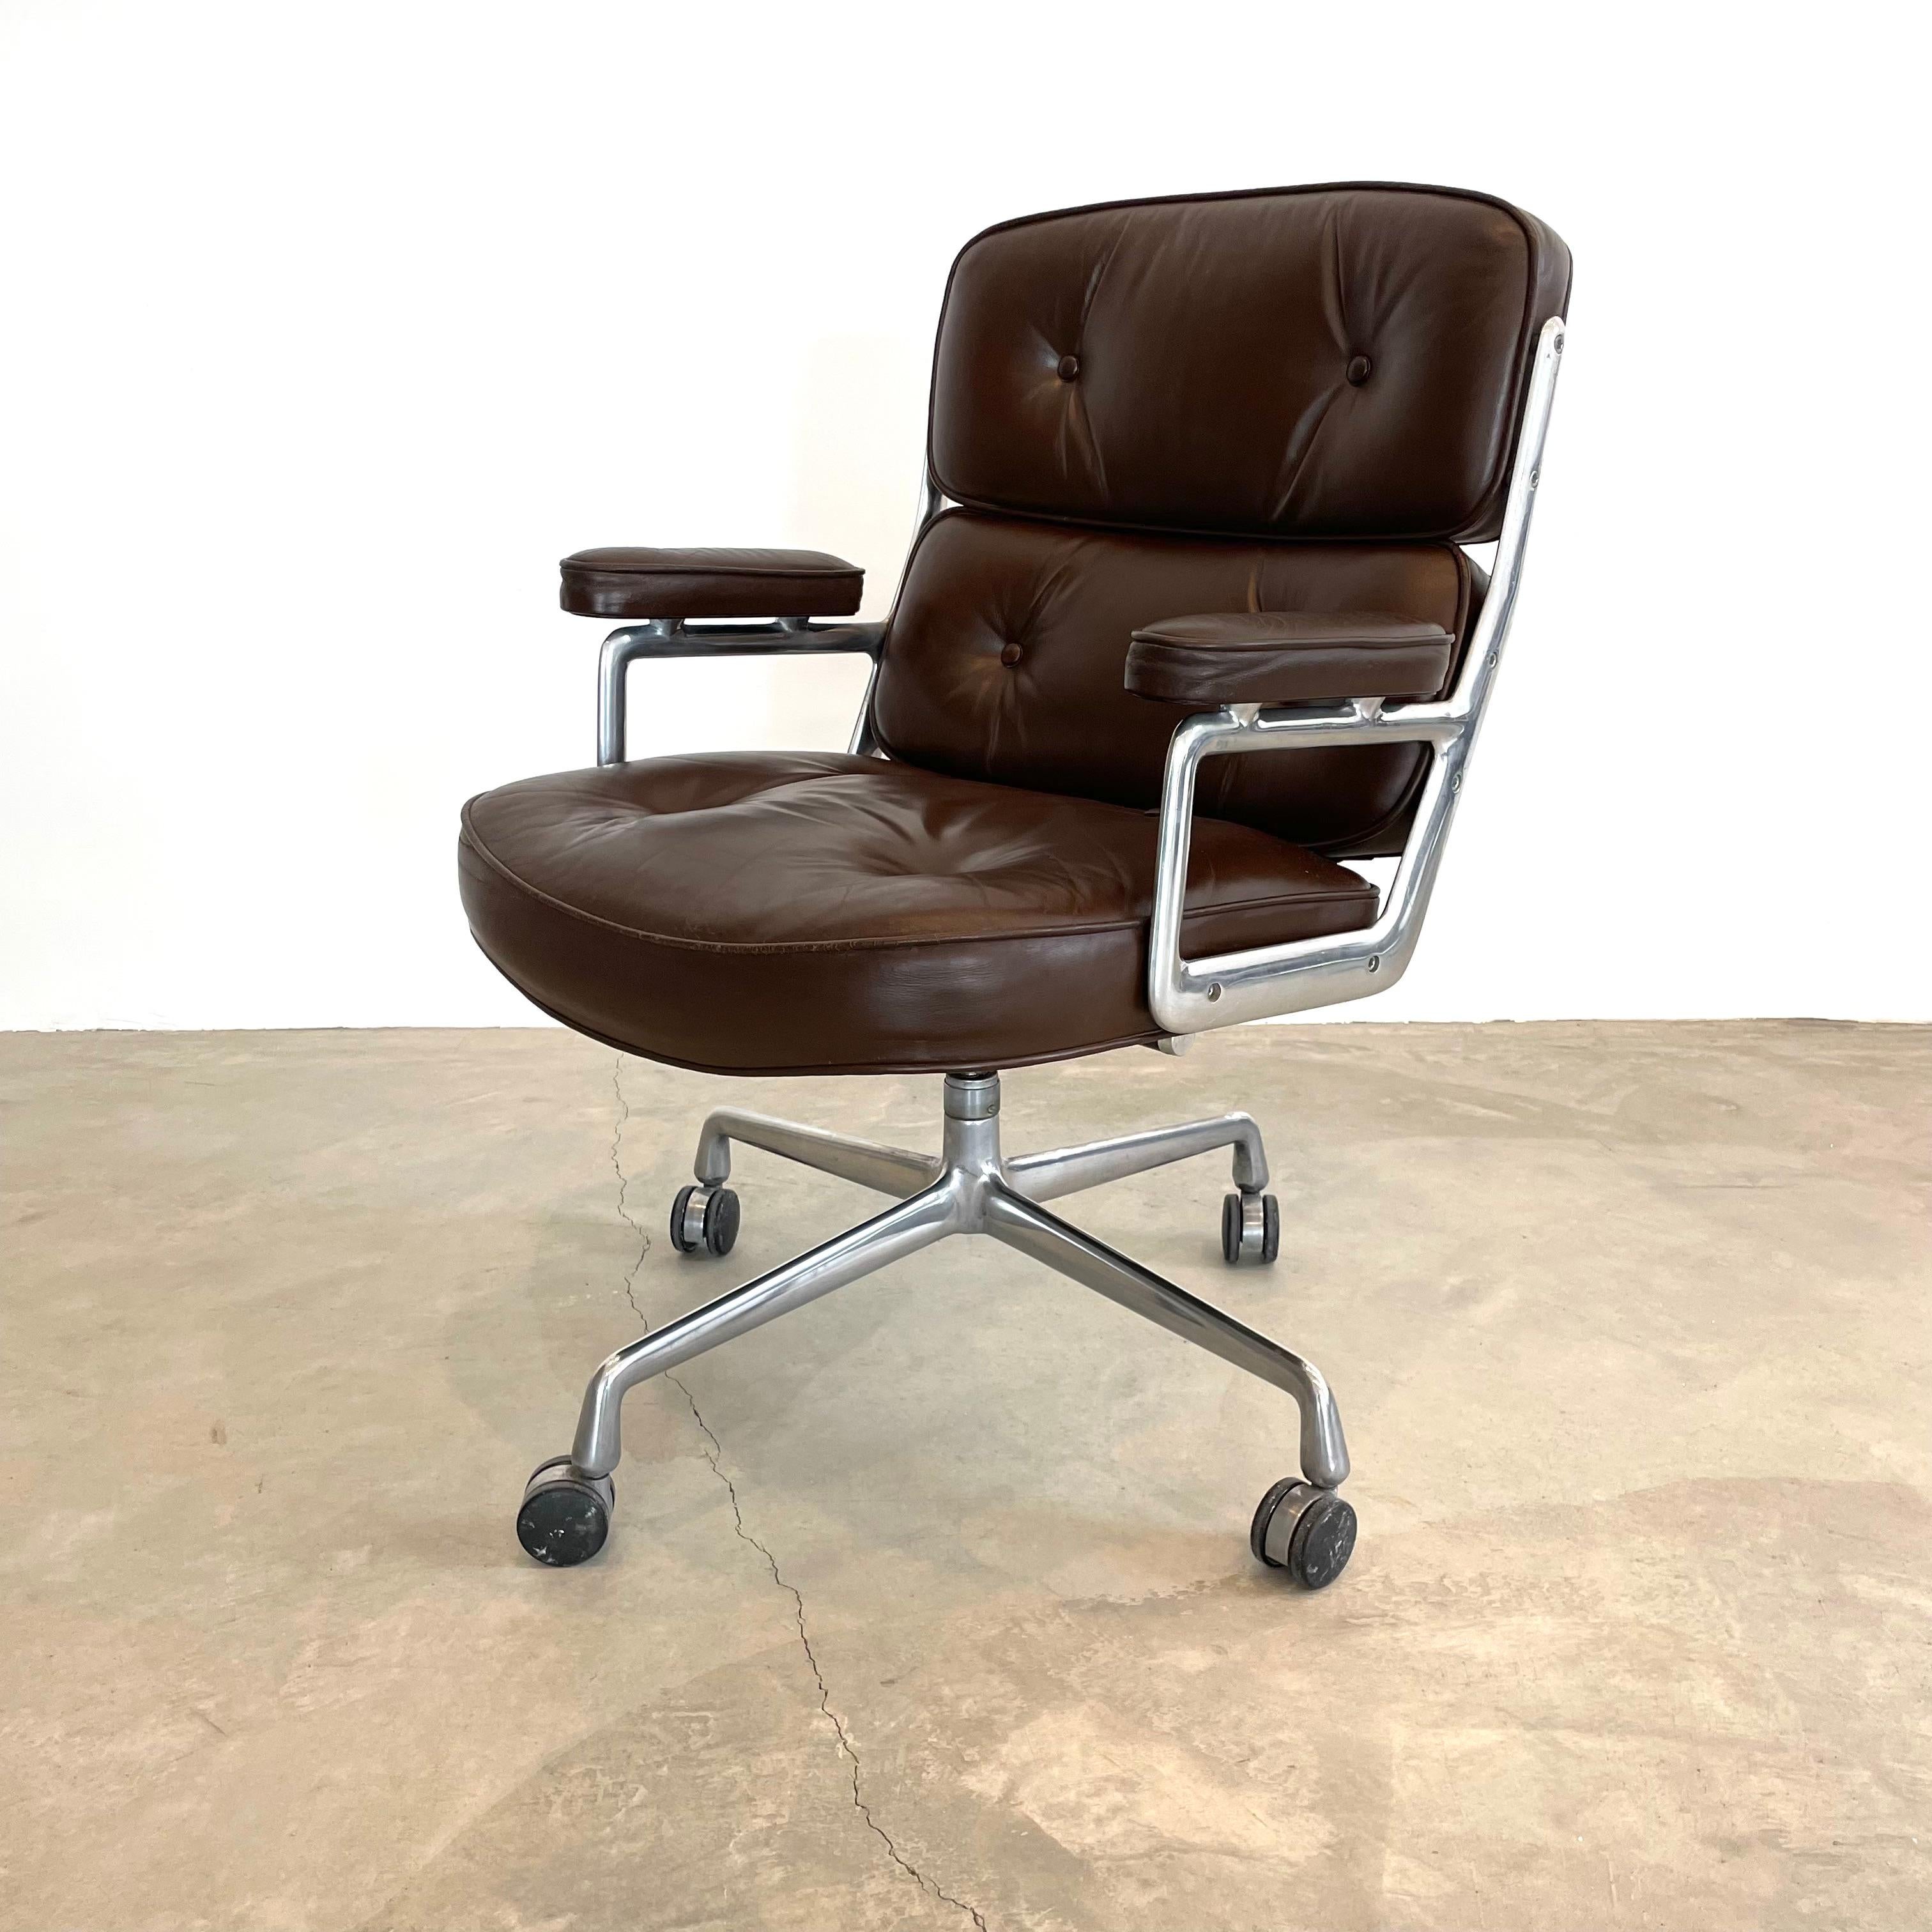 Eames Time Life Chair in Chocolate Leather for Herman Miller, 1978 USA For Sale 11